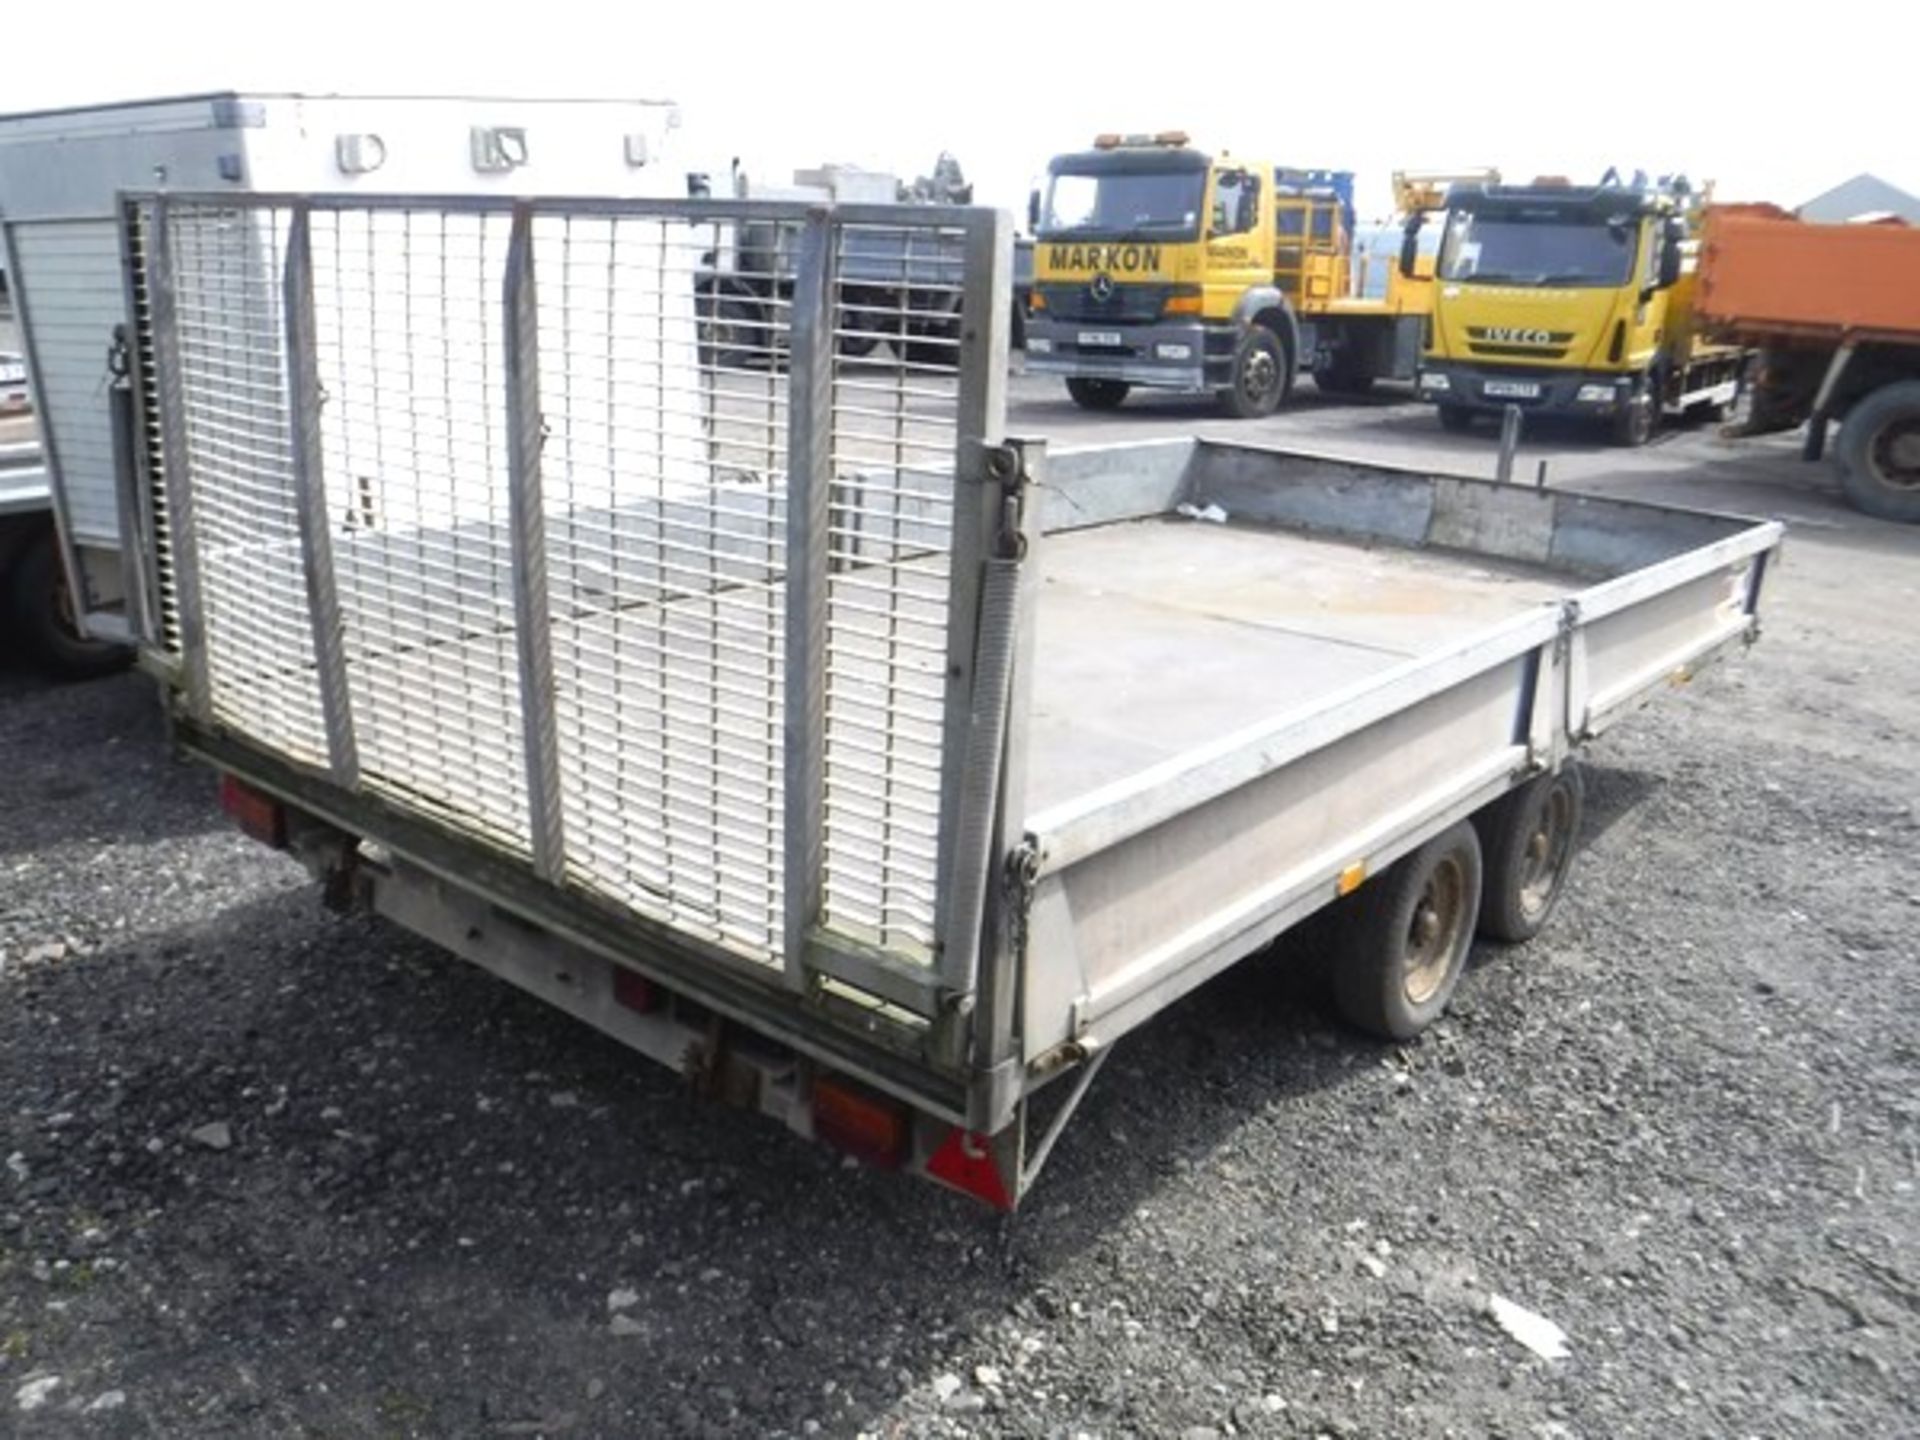 BATESON 2643 8' x 14' low load trailer/tipper c/w tailgate s/n 28528. - Image 3 of 4